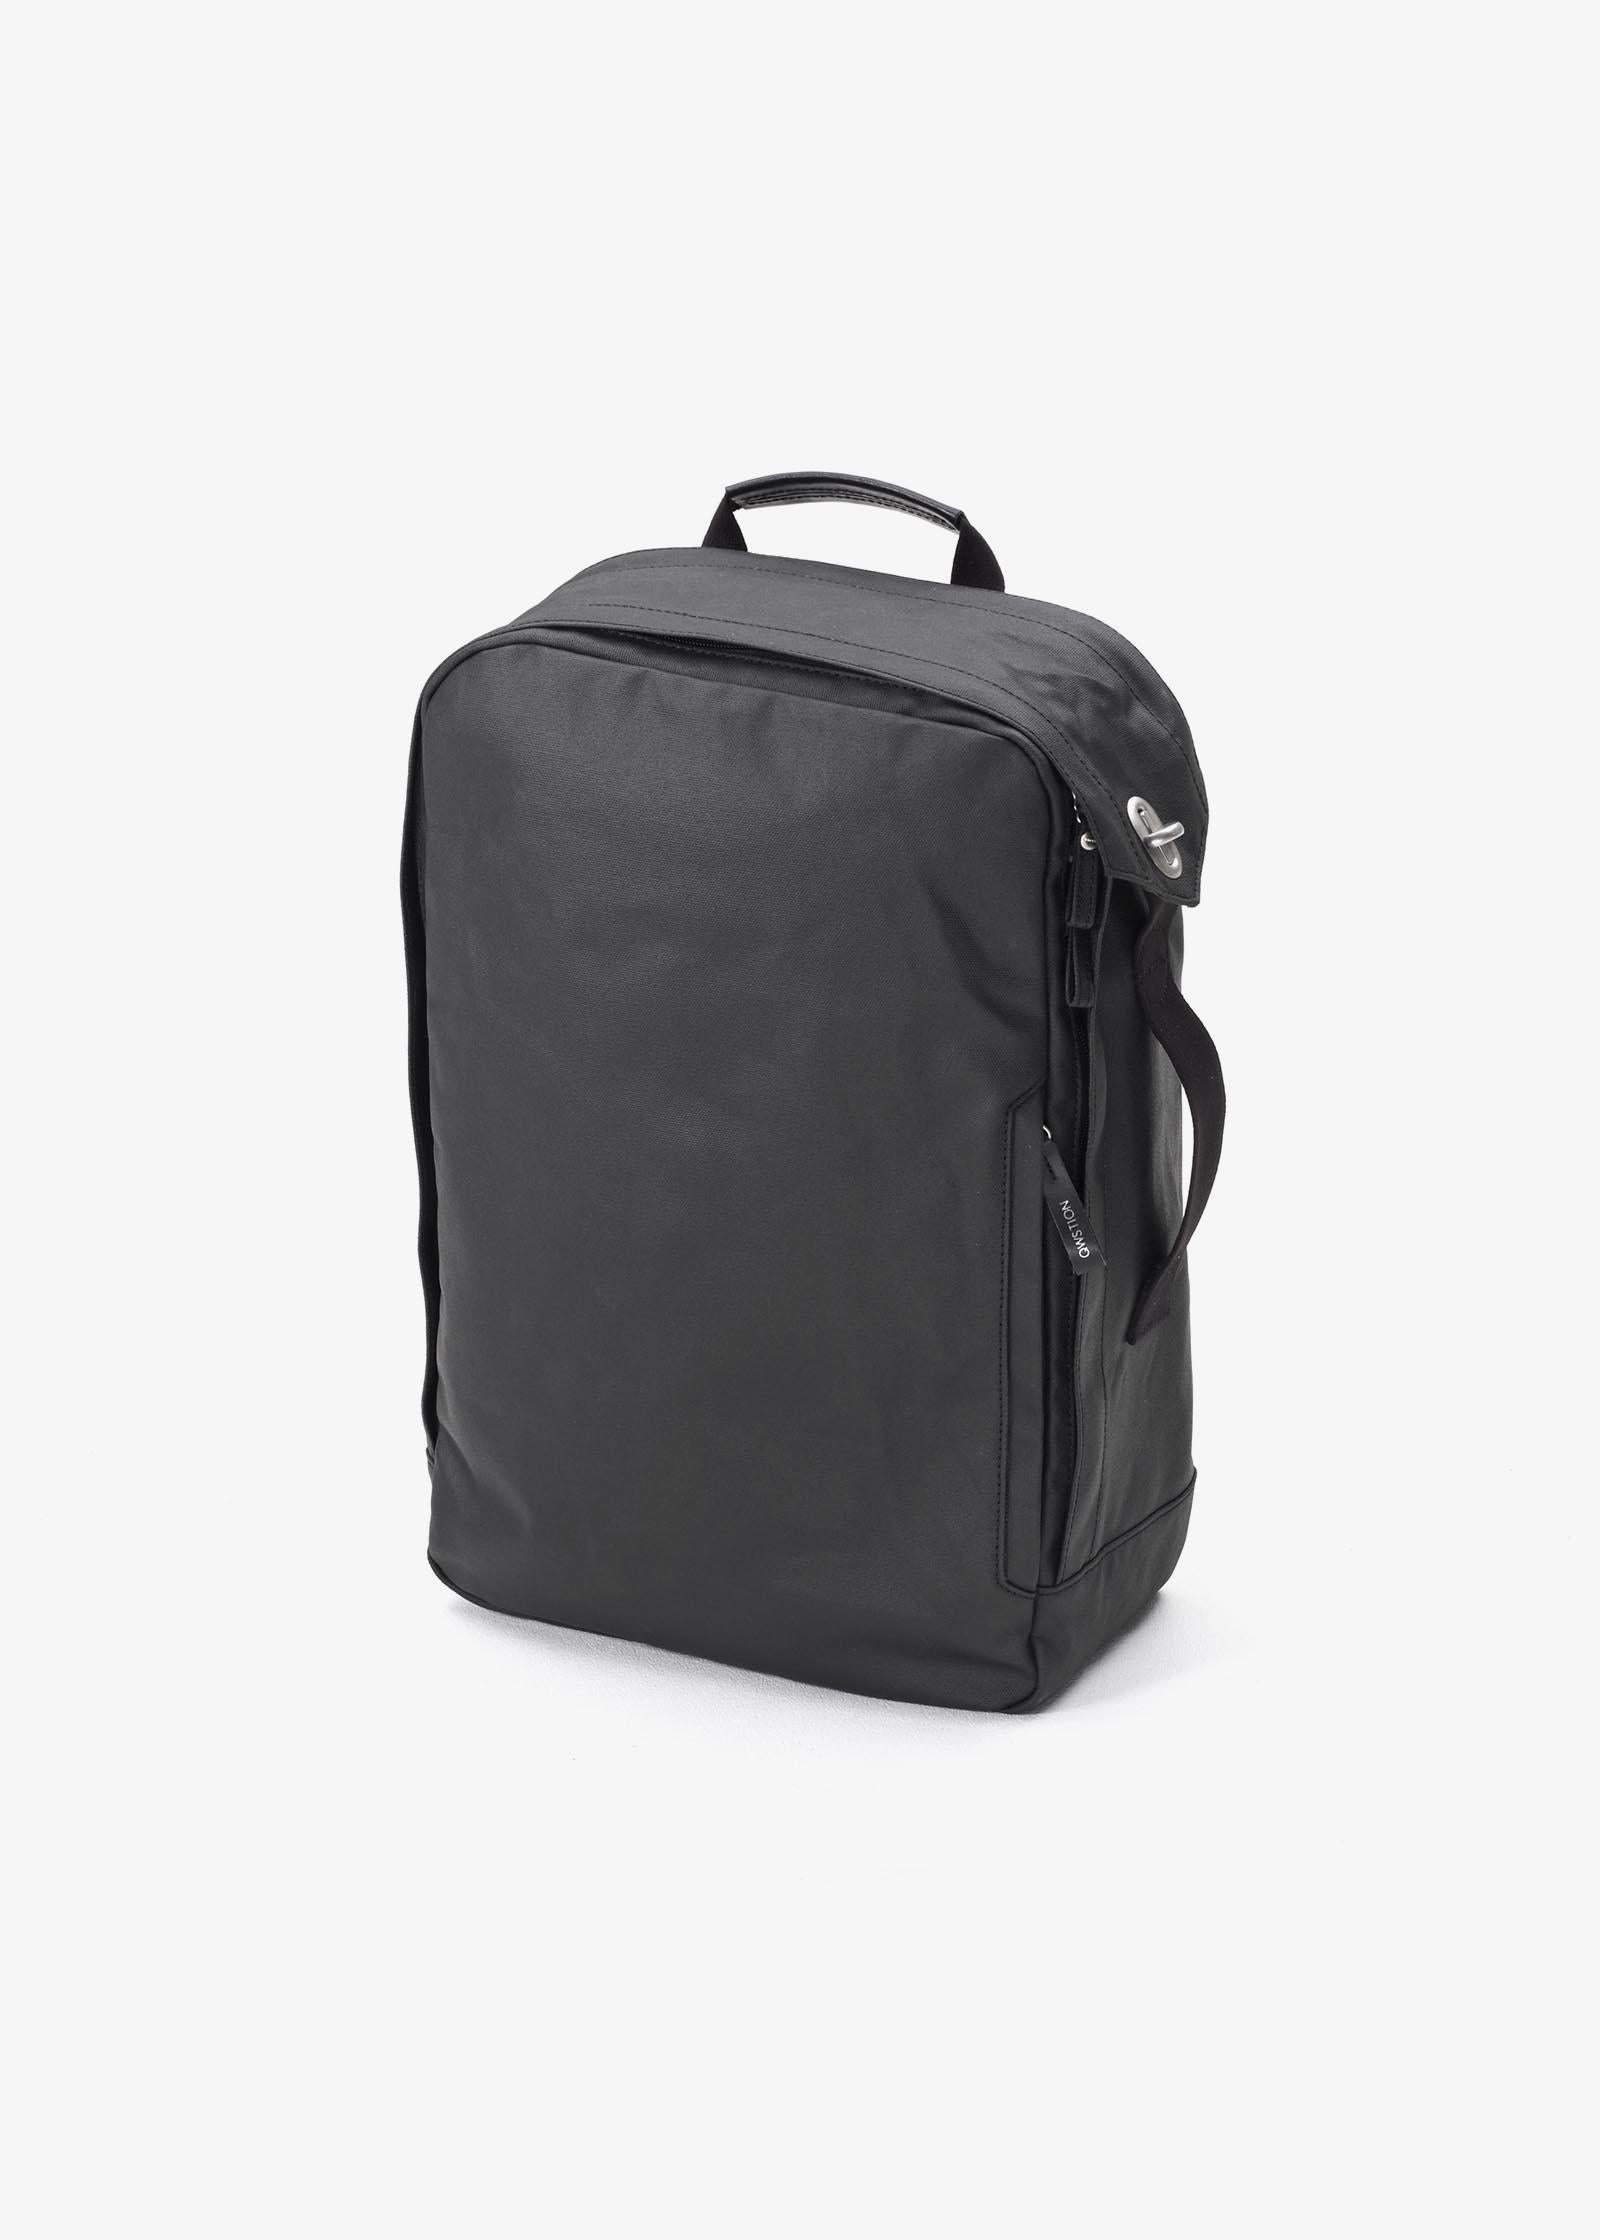 Backpack – Organic Jet Black - QWSTION